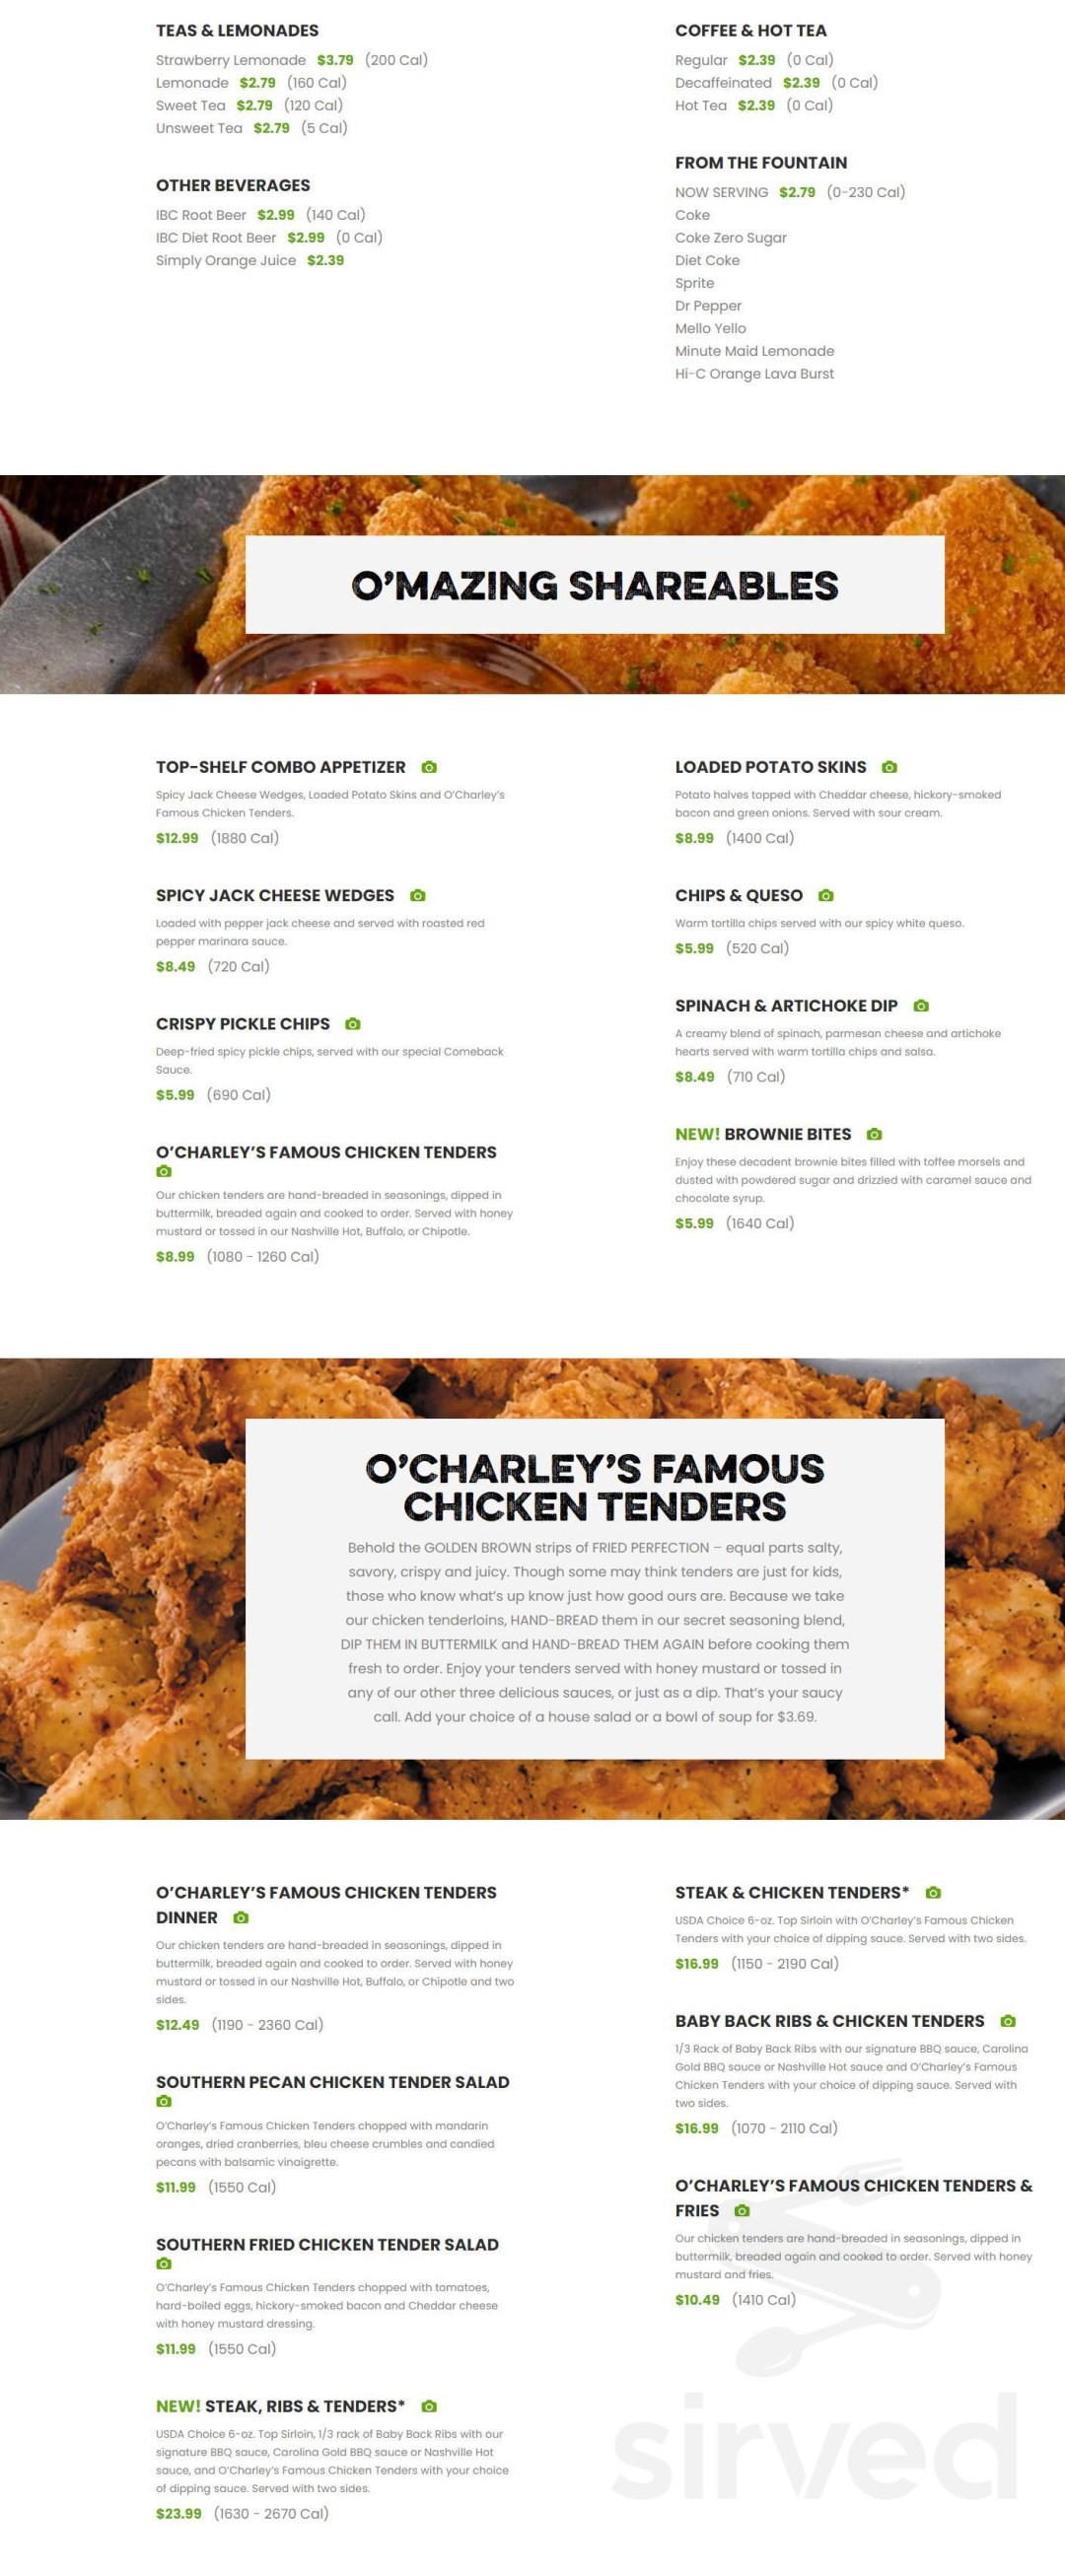 Picture of: O’Charley’s Restaurant & Bar menu in Cold Spring, Kentucky, USA